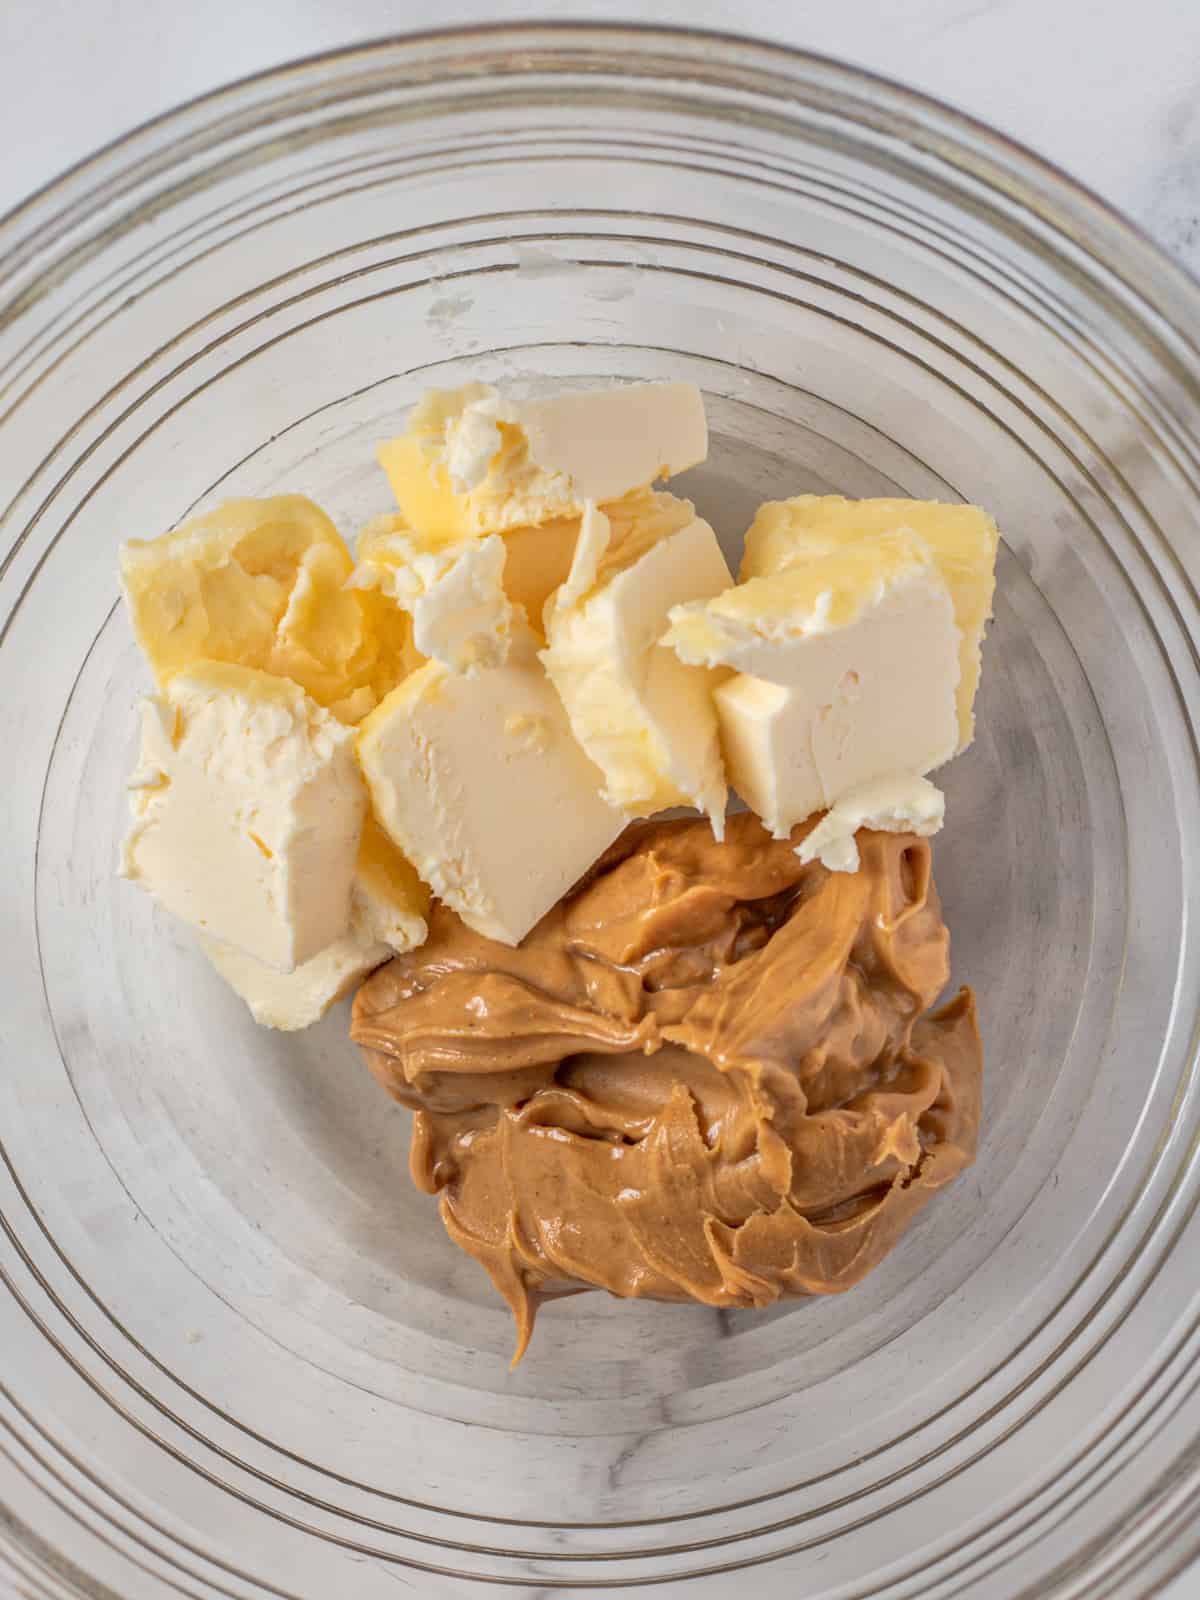 Butter and peanut butter in a mixing bowl.